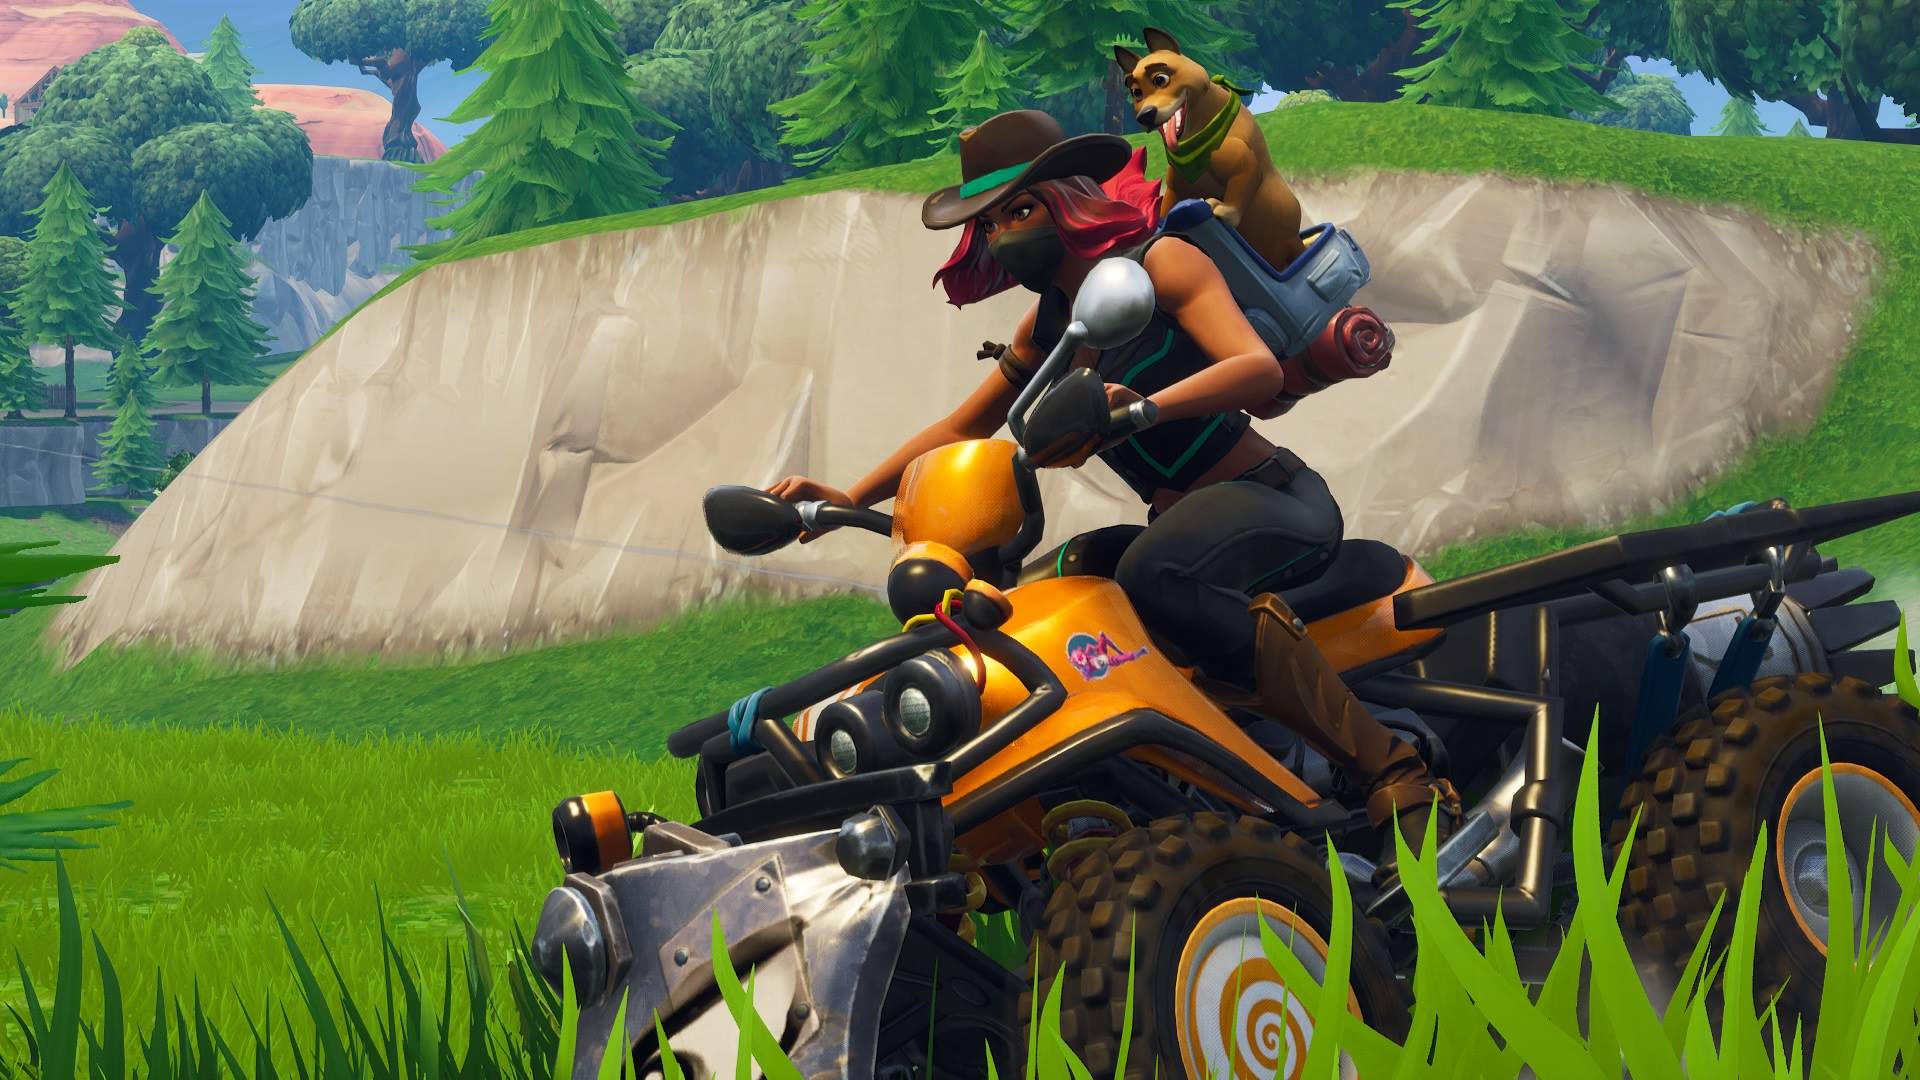 Fortnite Vehicle Timed Trial Locations Video Map And Guide For - fortnite vehicle timed trial locations video map and guide for week 10 inverse